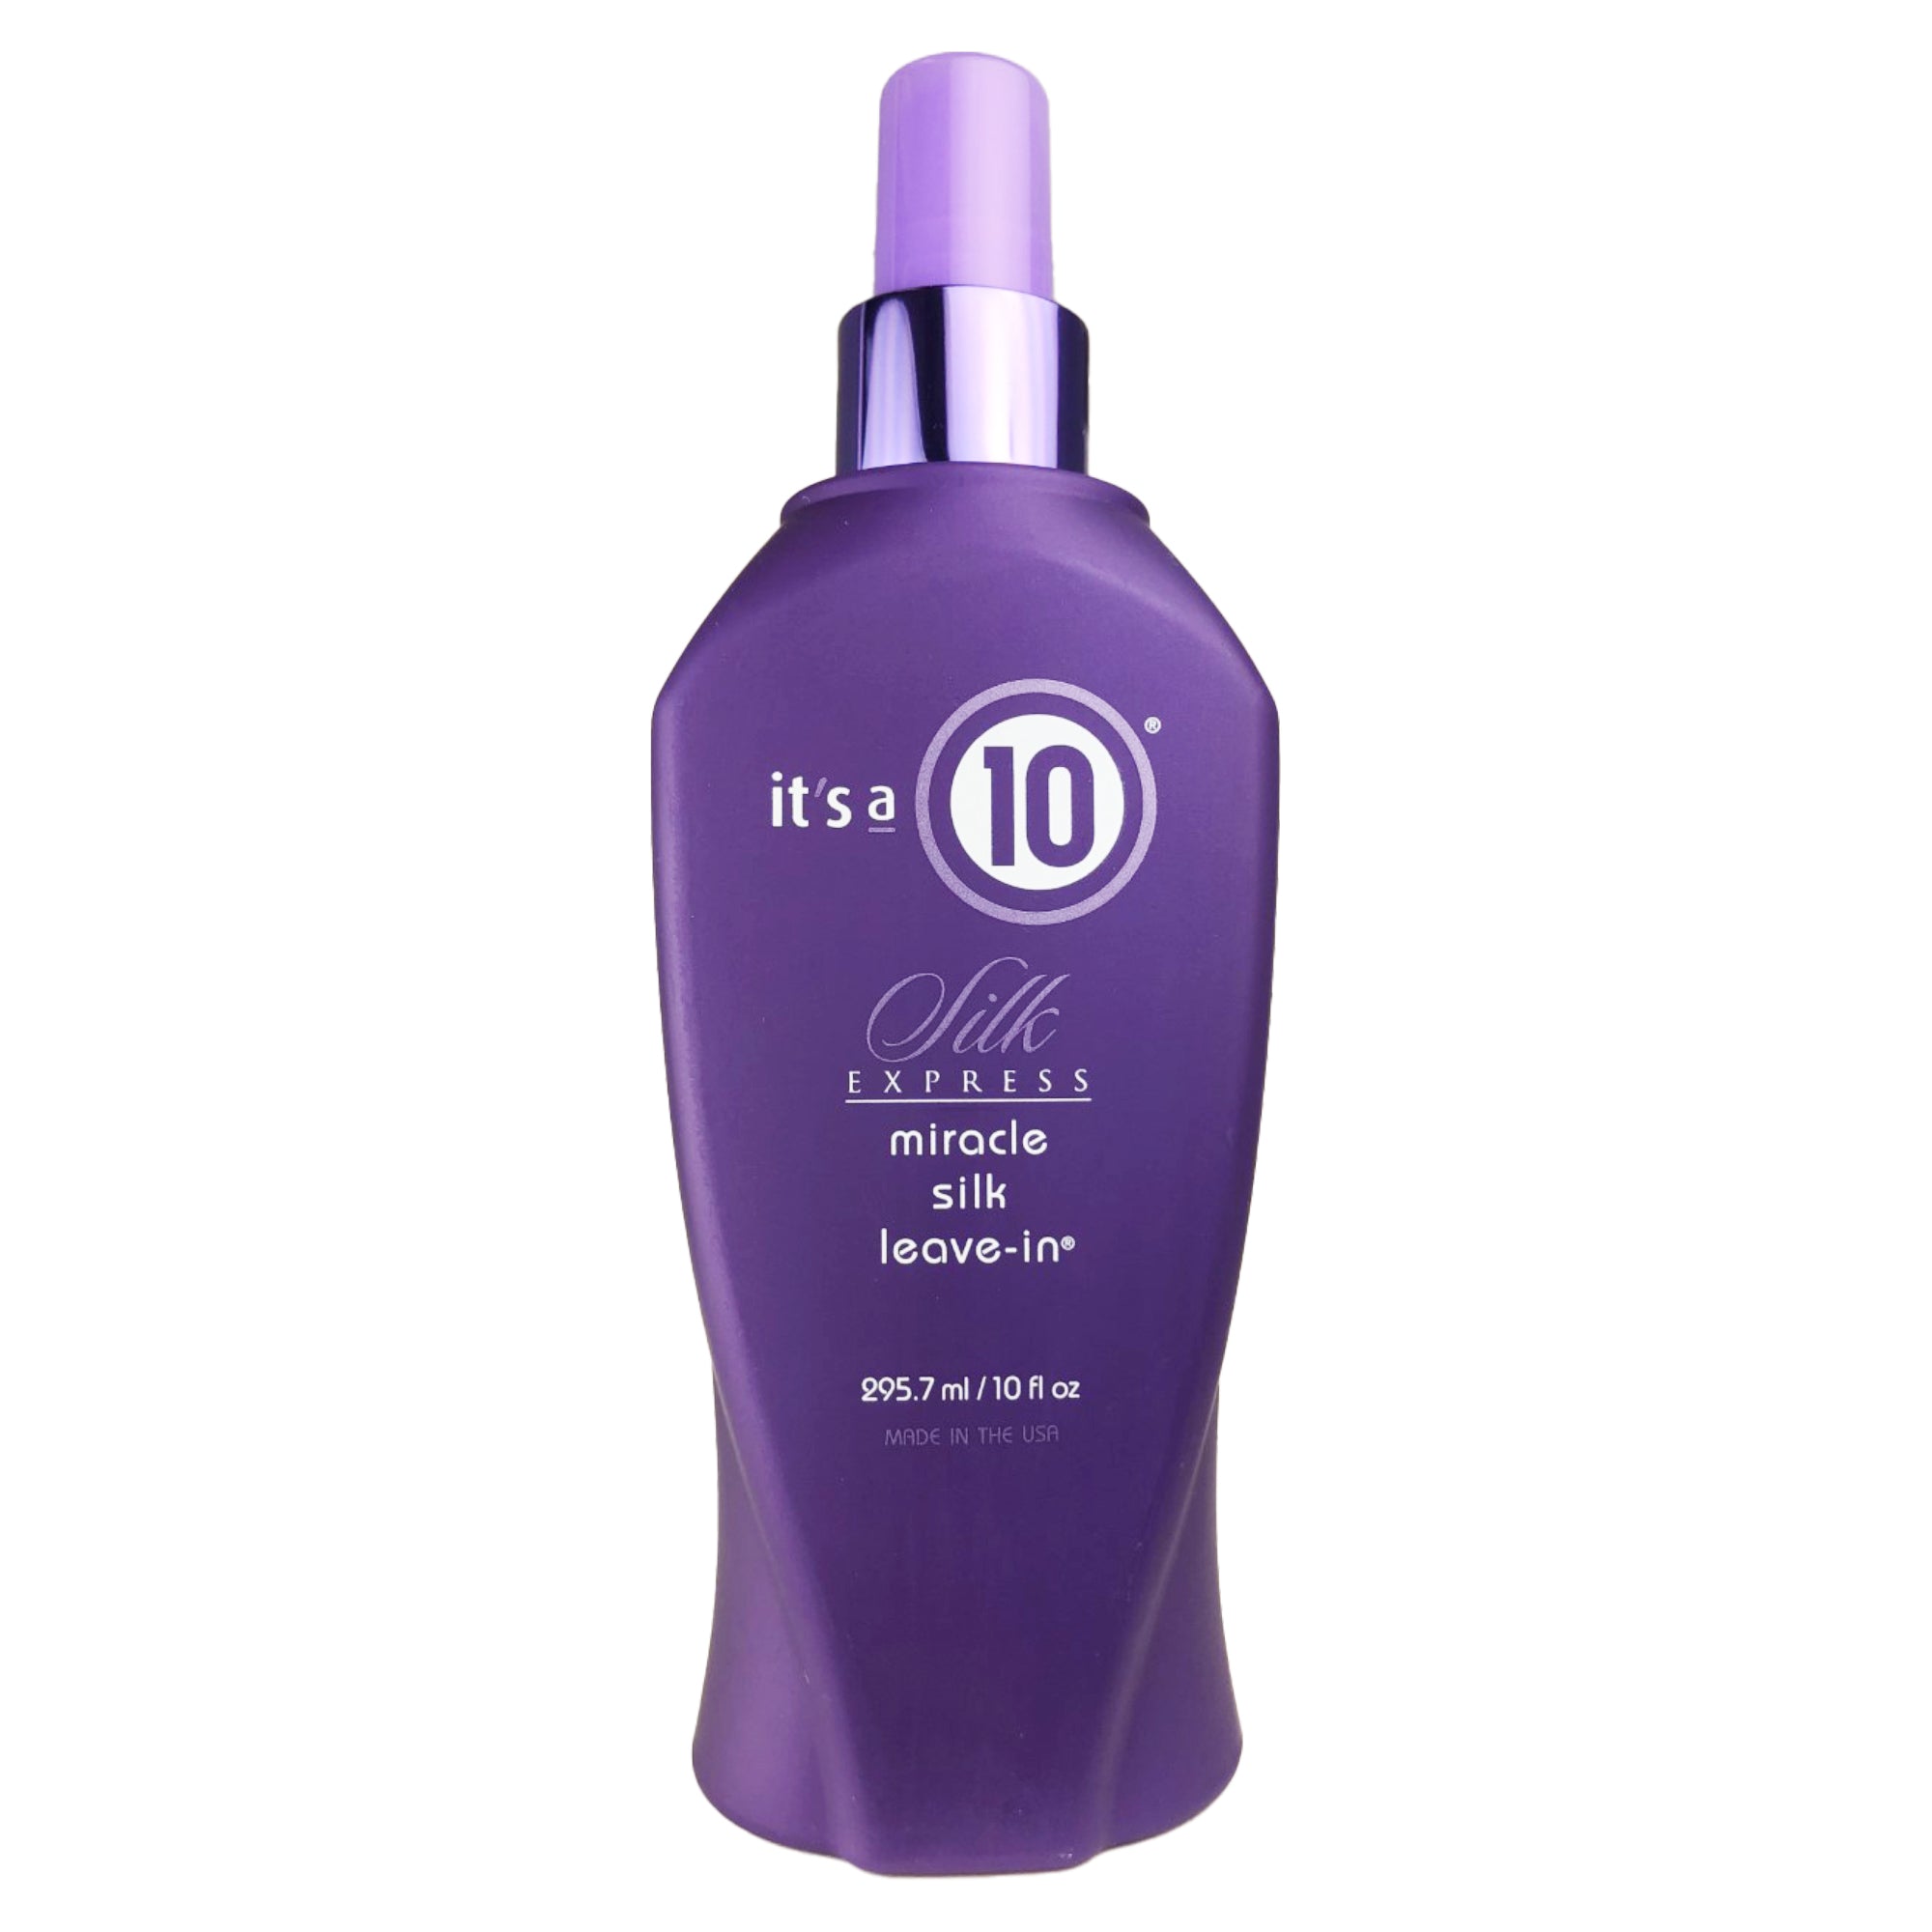 It's a 10 Silk Express Miracle Silk Leave In Hair Conditioner 10 oz